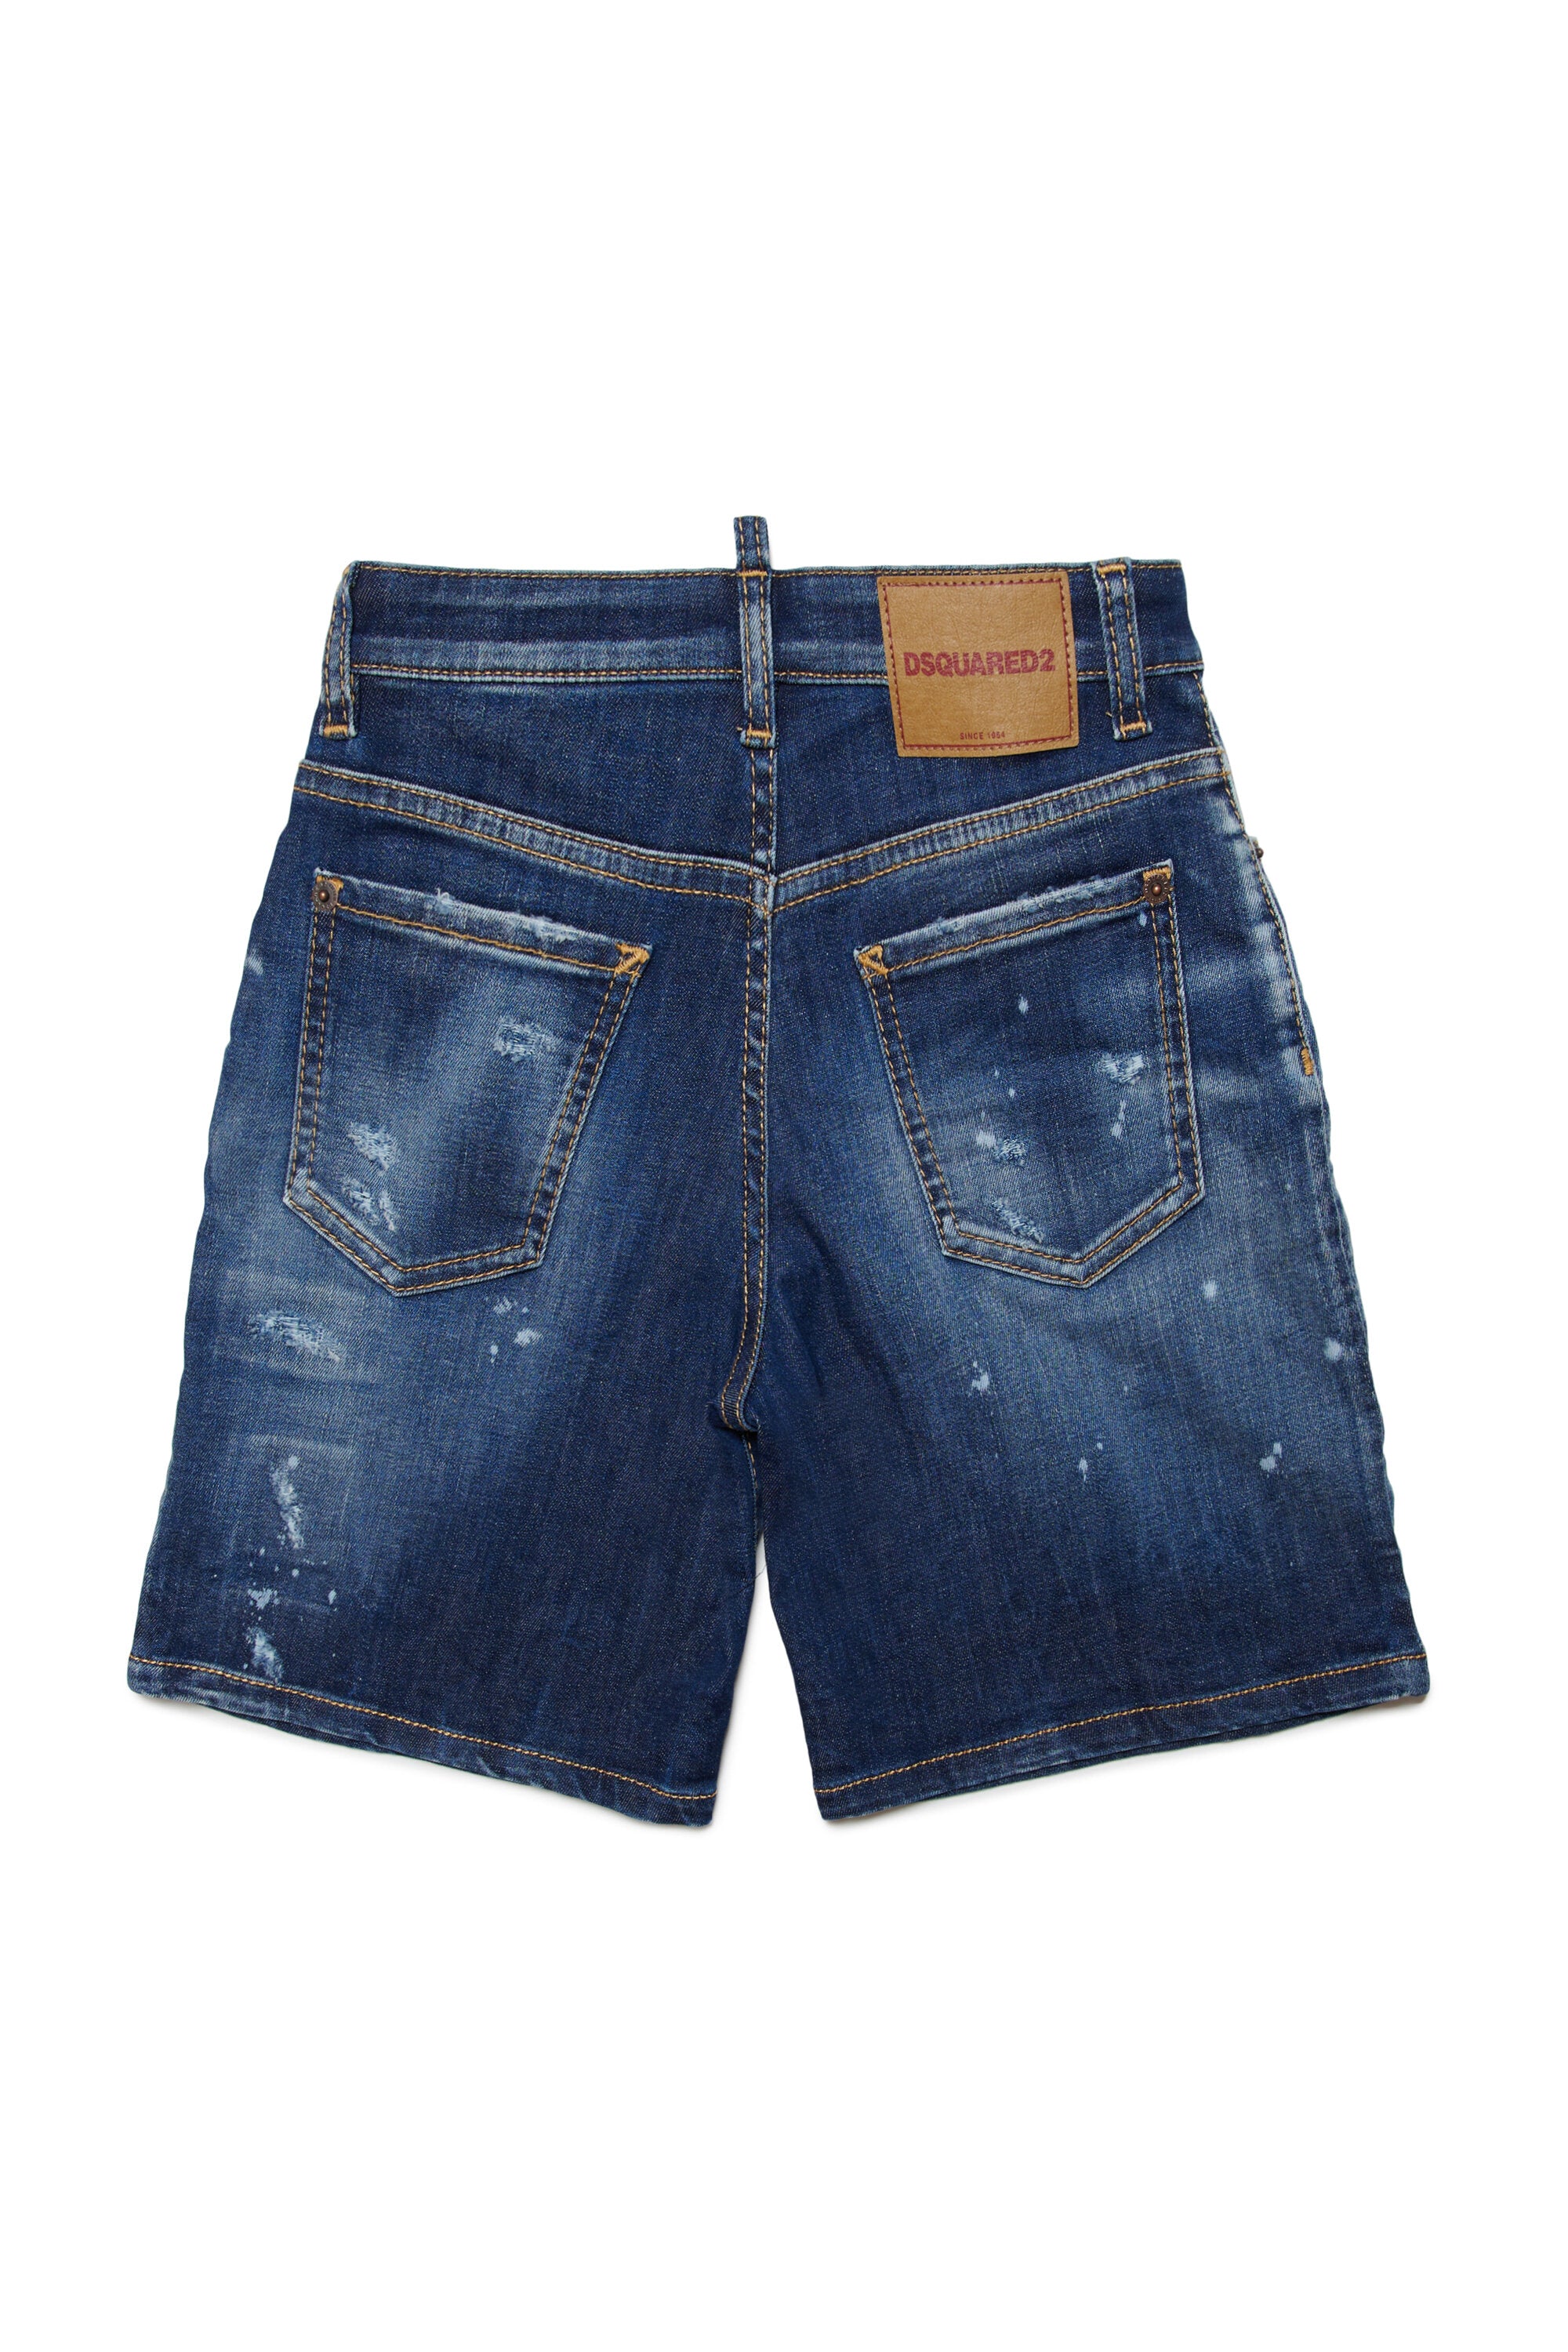 Dark denim shorts with stains and tears